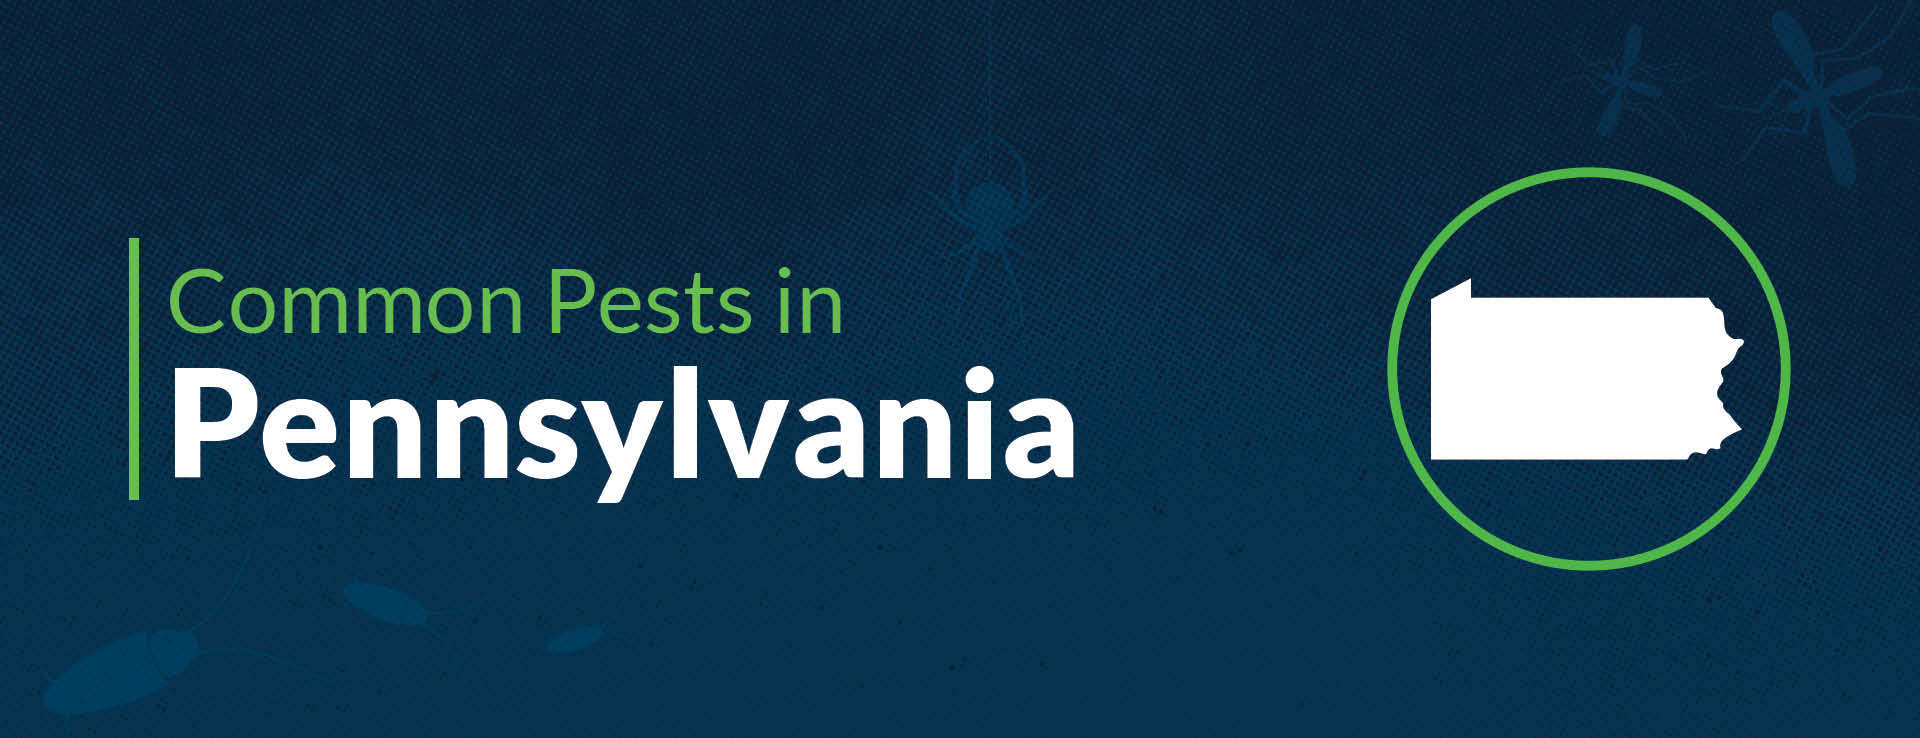 PPMA Common Pests By State Pennsylvania